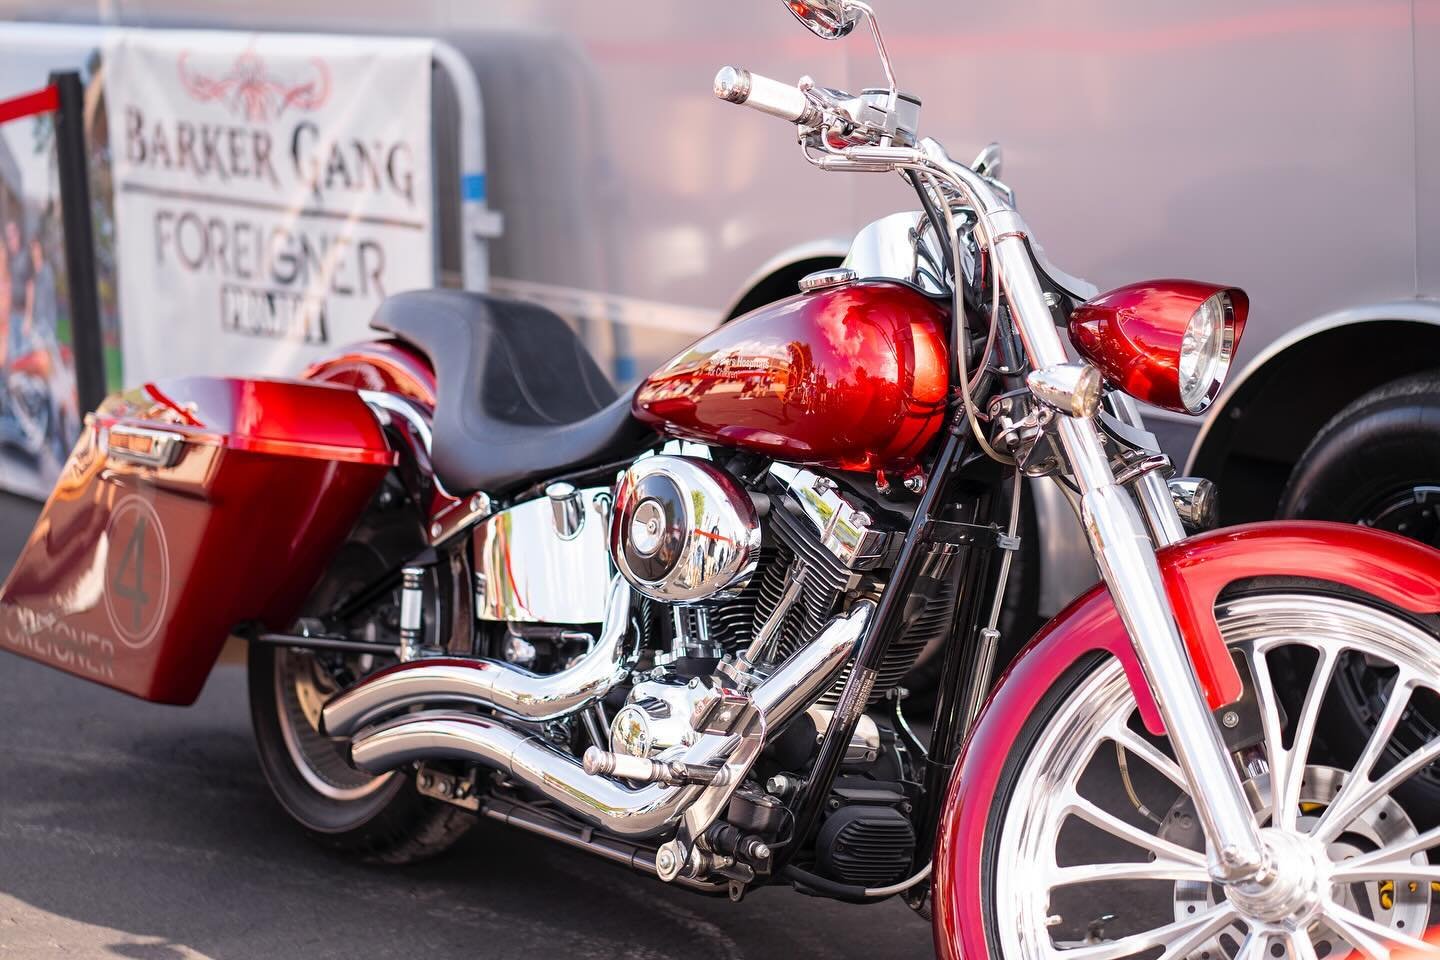 In collaboration with Barker Gang Custom, Foreigner is releasing a custom Ticket To Ride T-Shirt with 100% of proceeds benefiting @ShrinersHospitals. Every T-shirt purchased comes with a chance to win this fully custom Harley Davidson motorcycle buil